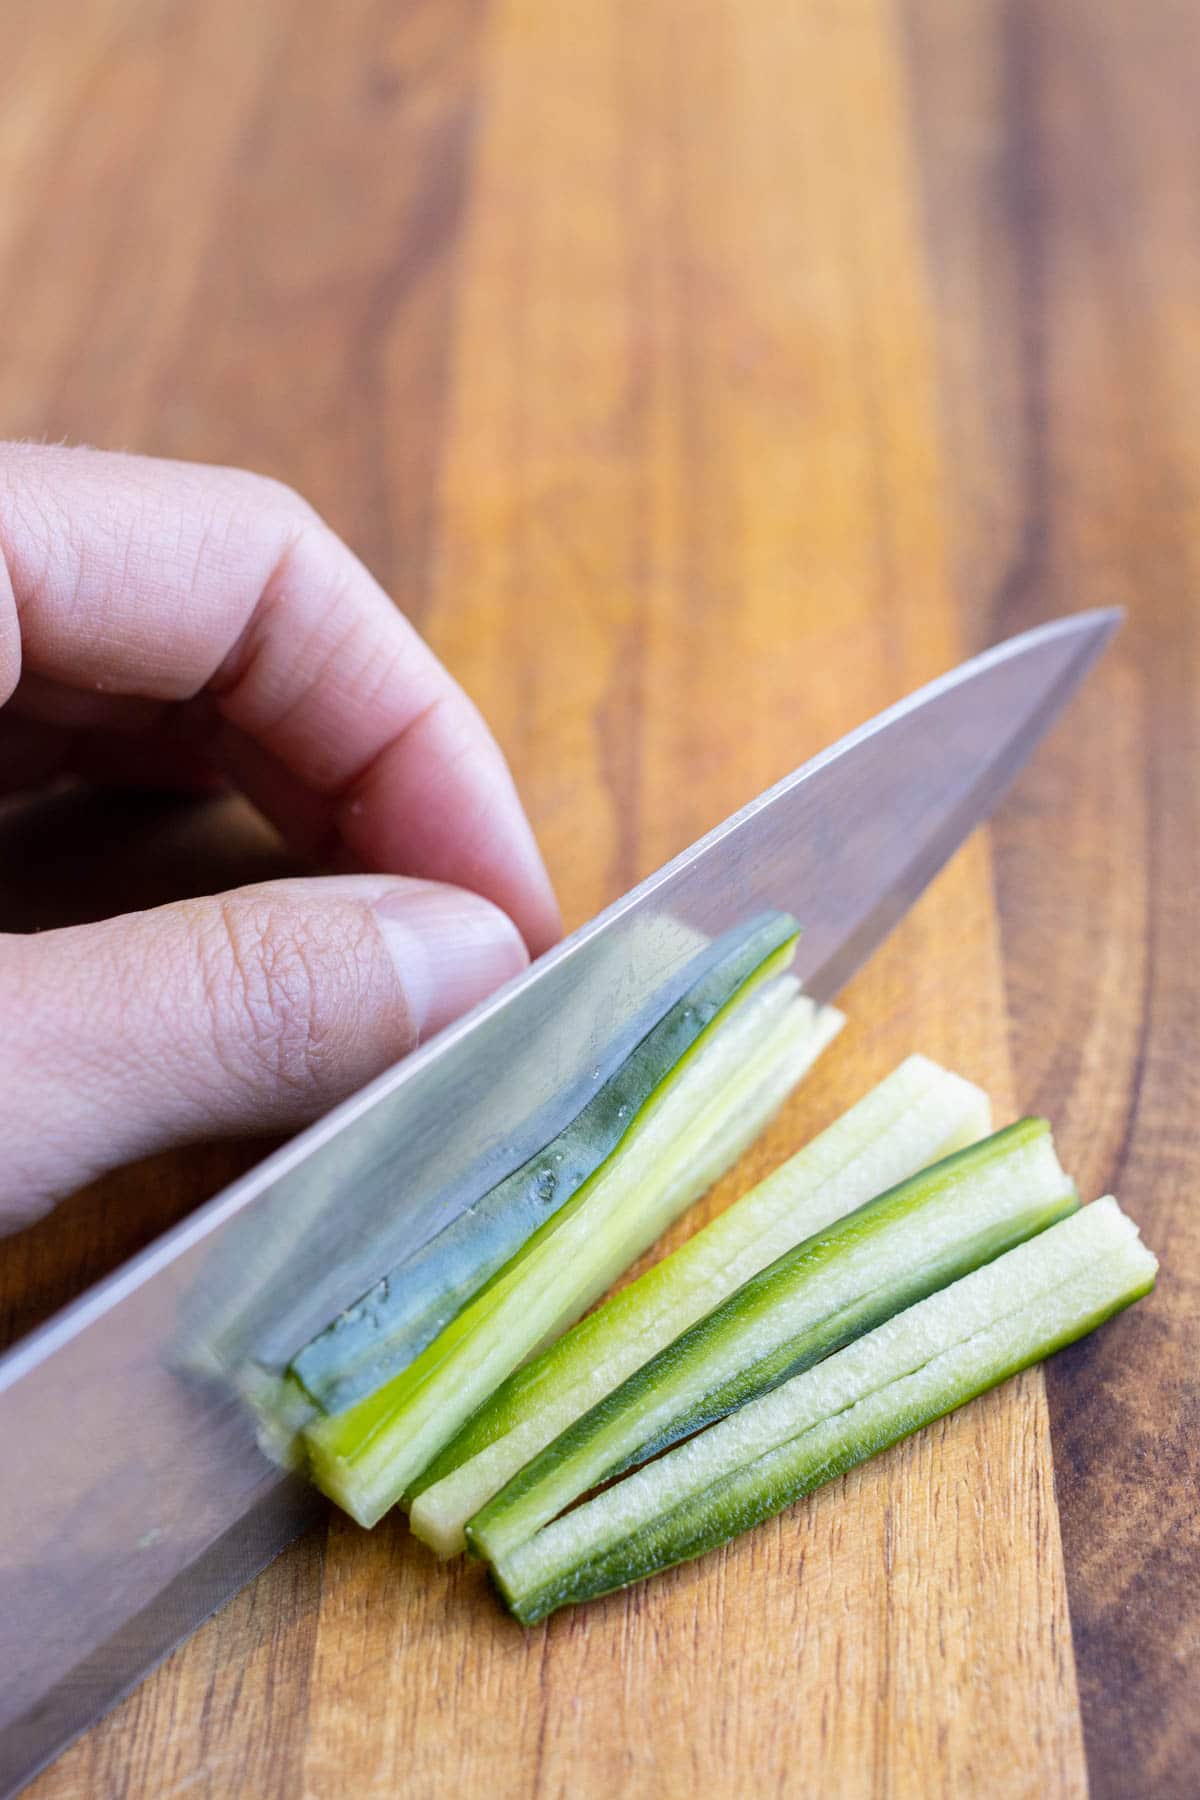 HOW TO CUT VEGETABLES, JULIENNE, DICE, BRUNOISE